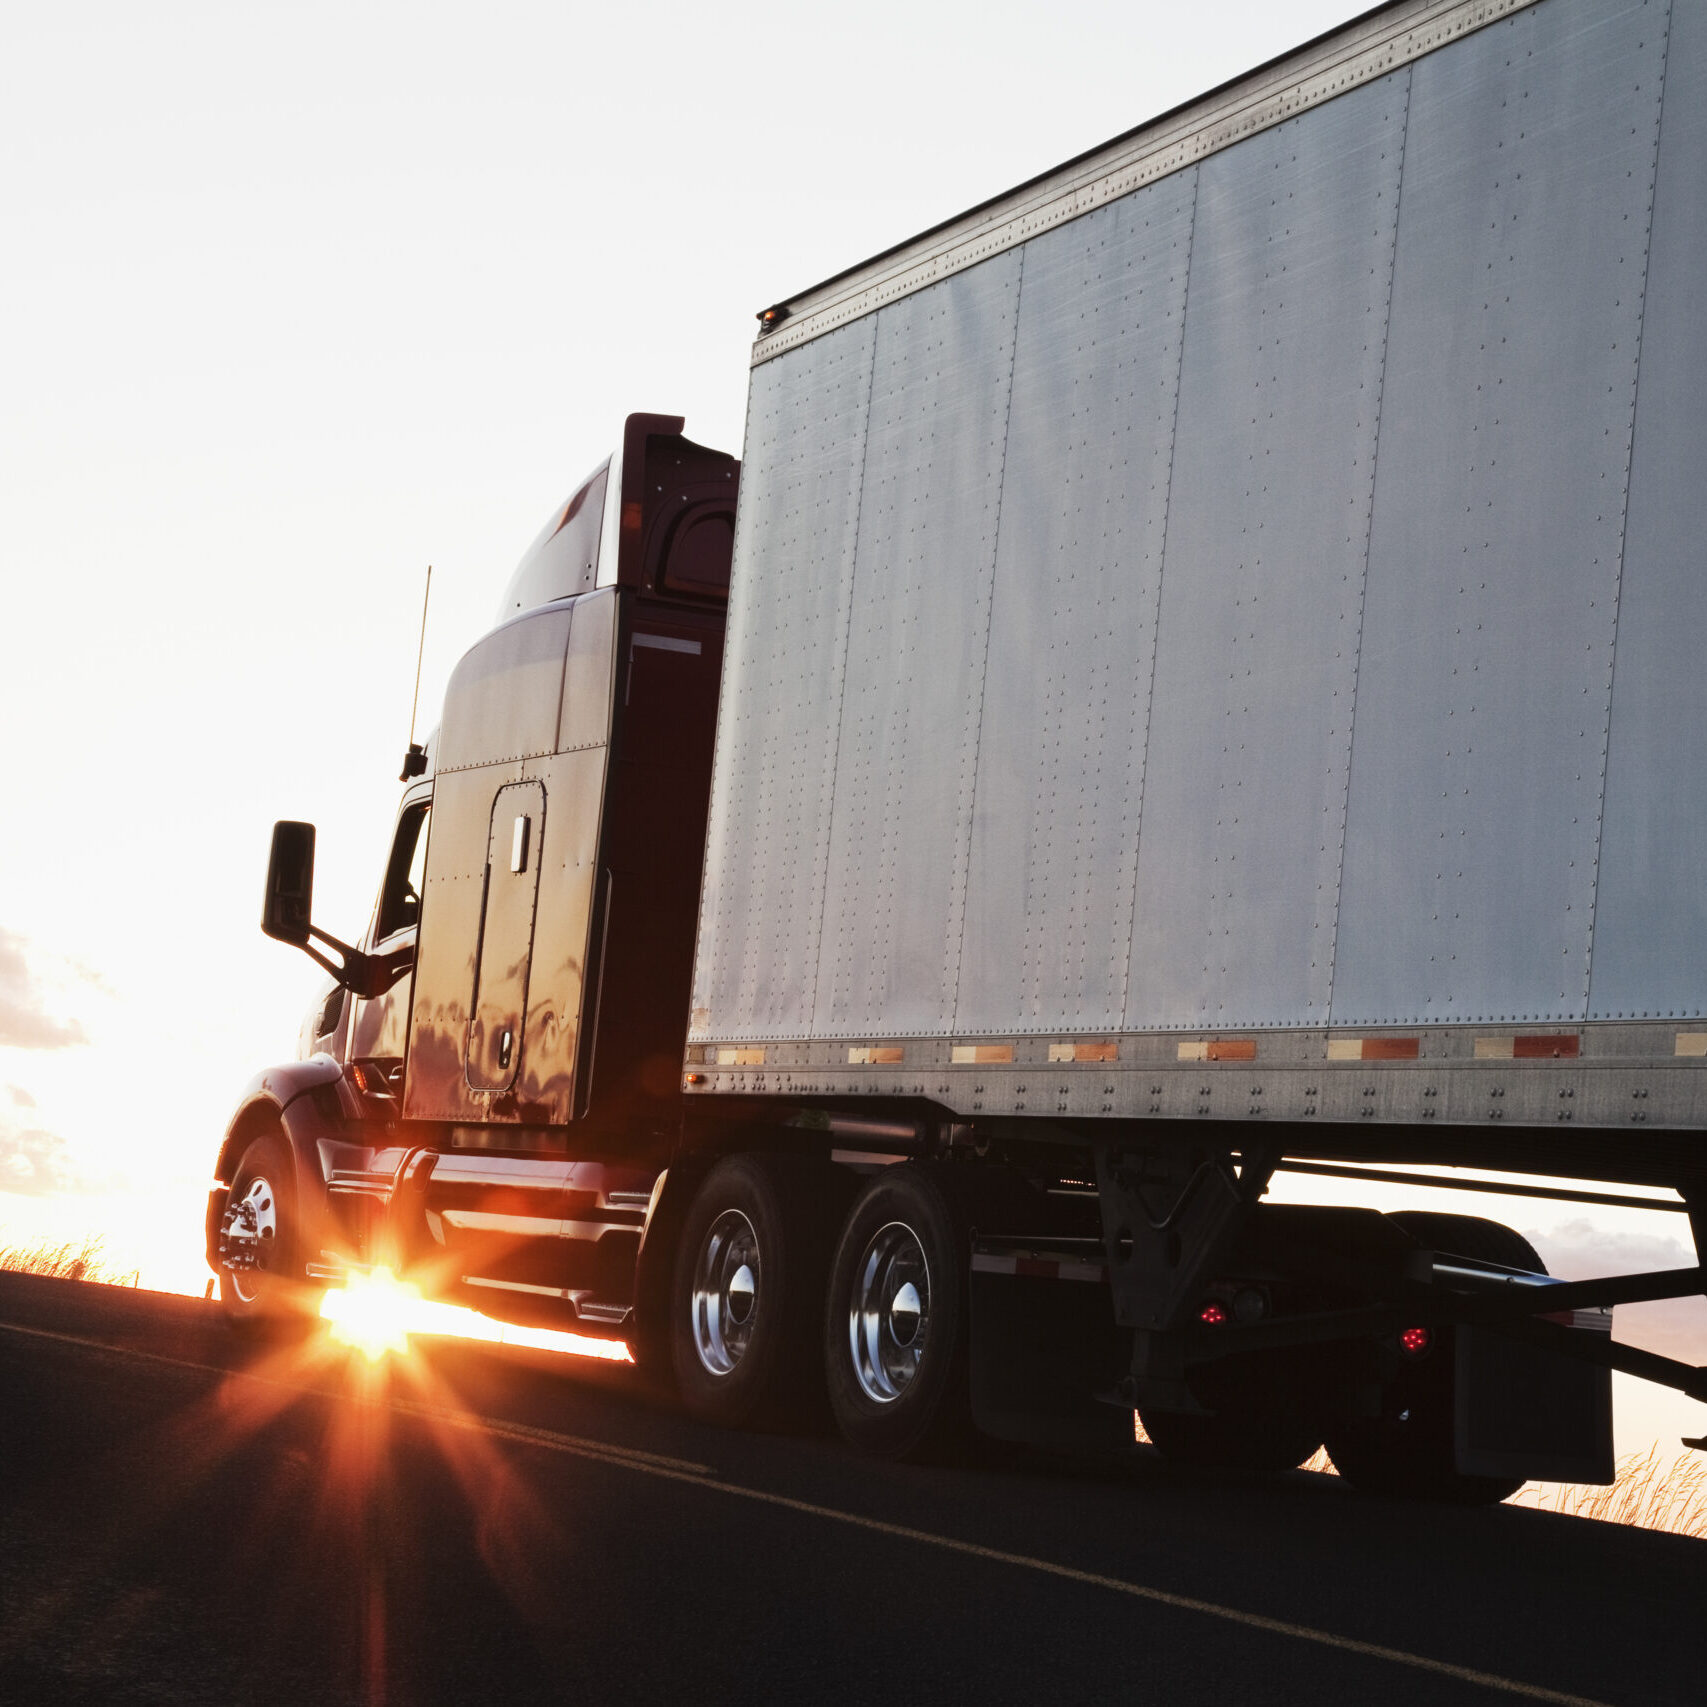 Silhouette of a  commercial truck driving on a highway at sunset.